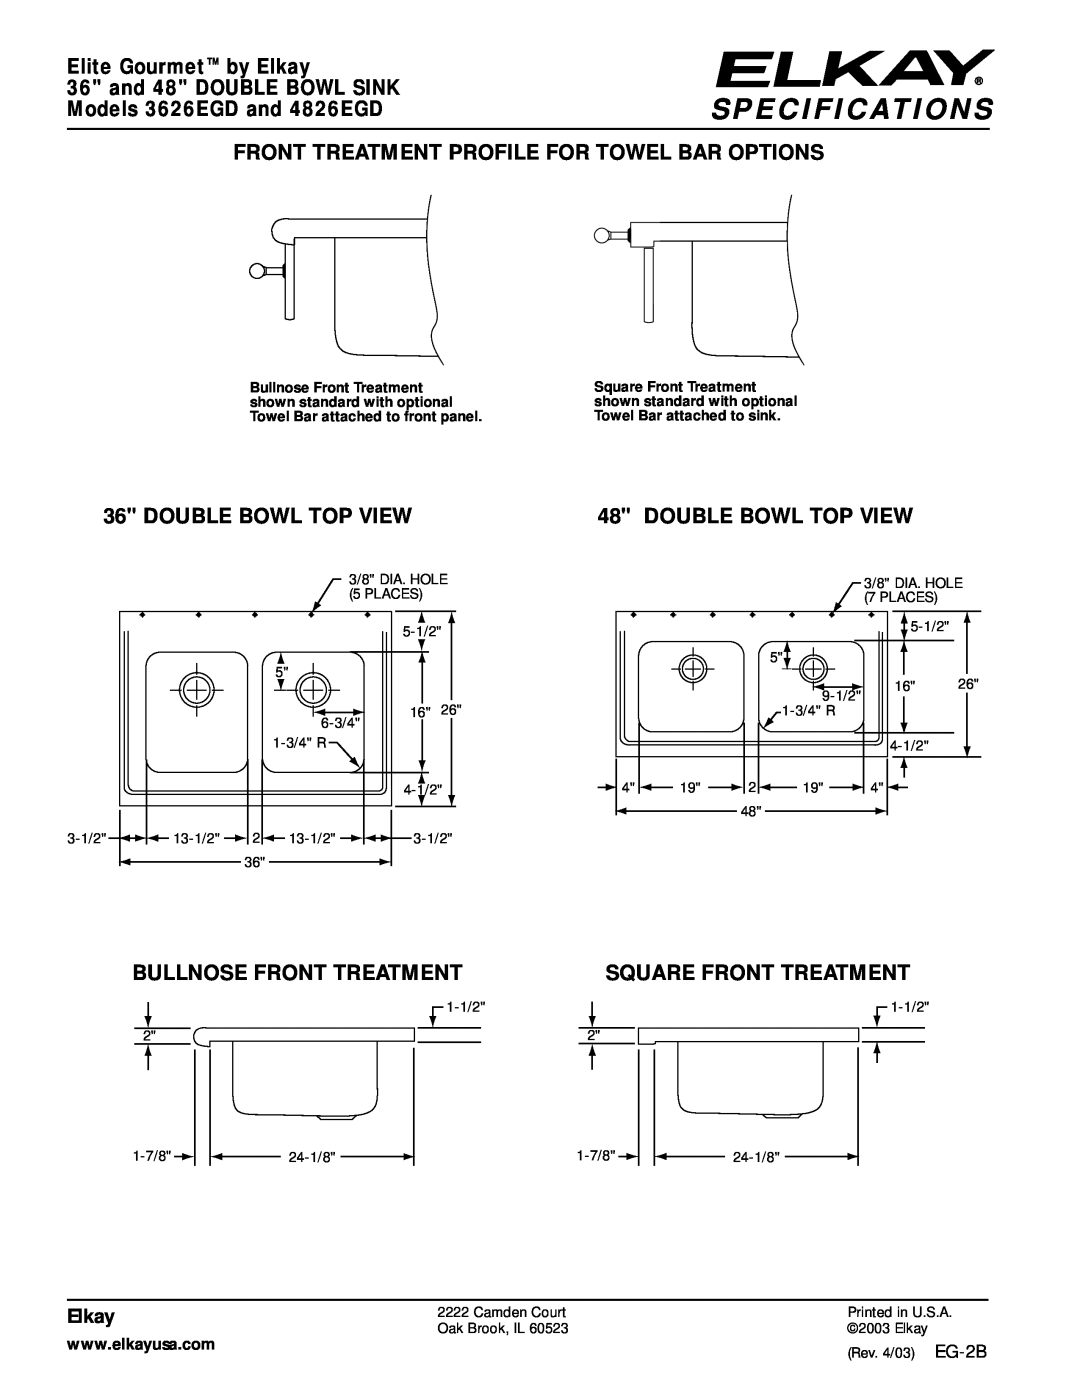 Elkay 4826EGD and 48 DOUBLE BOWL SINK, Front Treatment Profile For Towel Bar Options, Double Bowl Top View, Specifications 